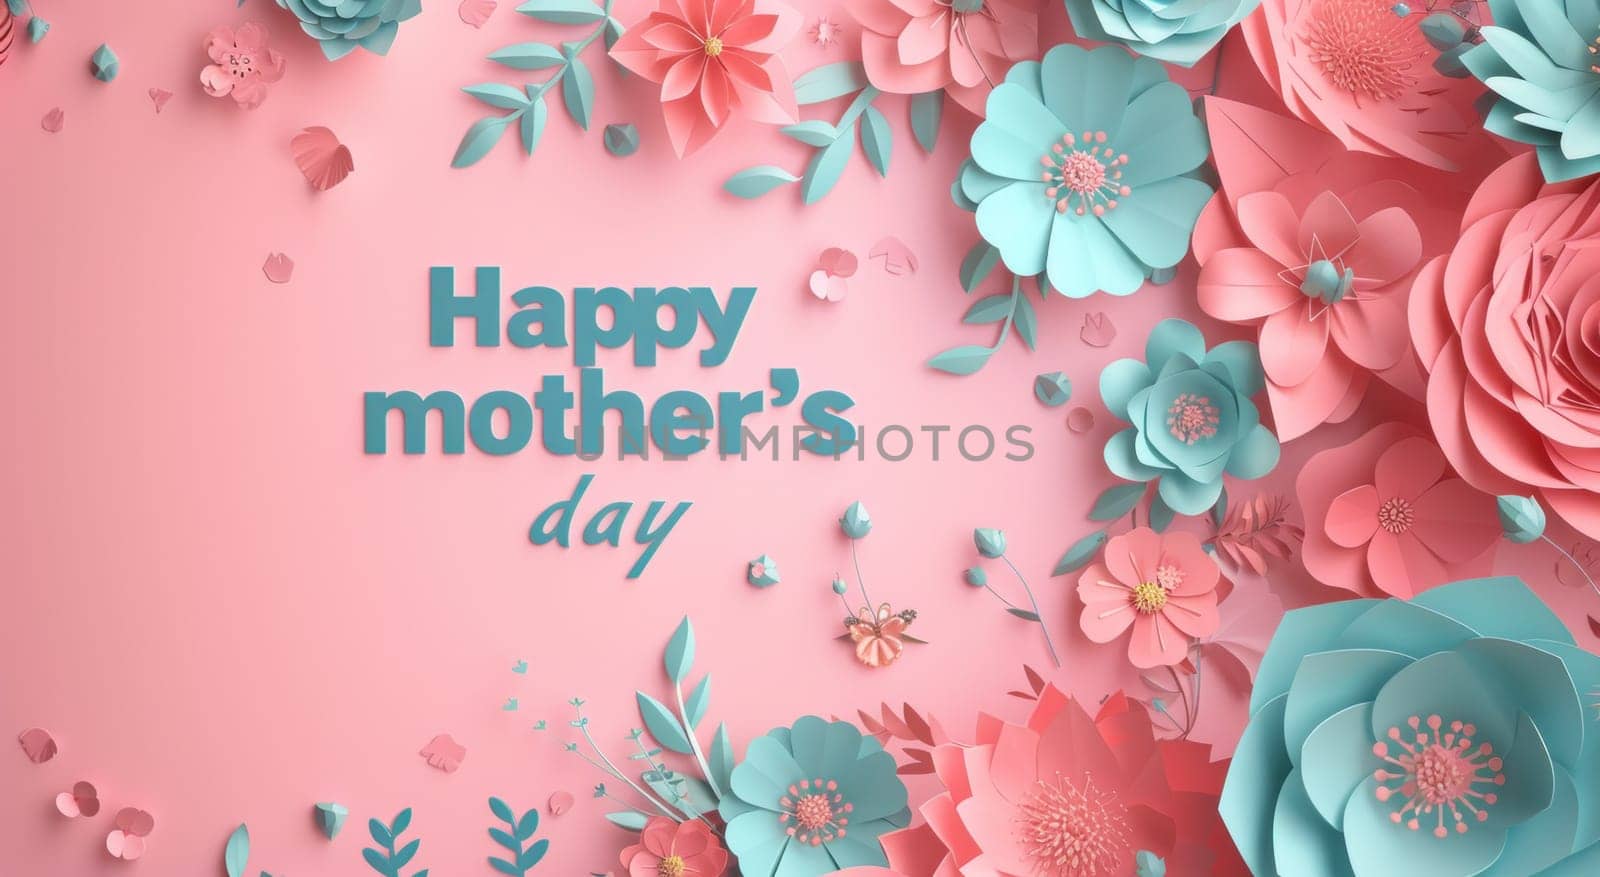 Beautiful mother's day background with pink flowers and leaves for celebration and appreciation of moms